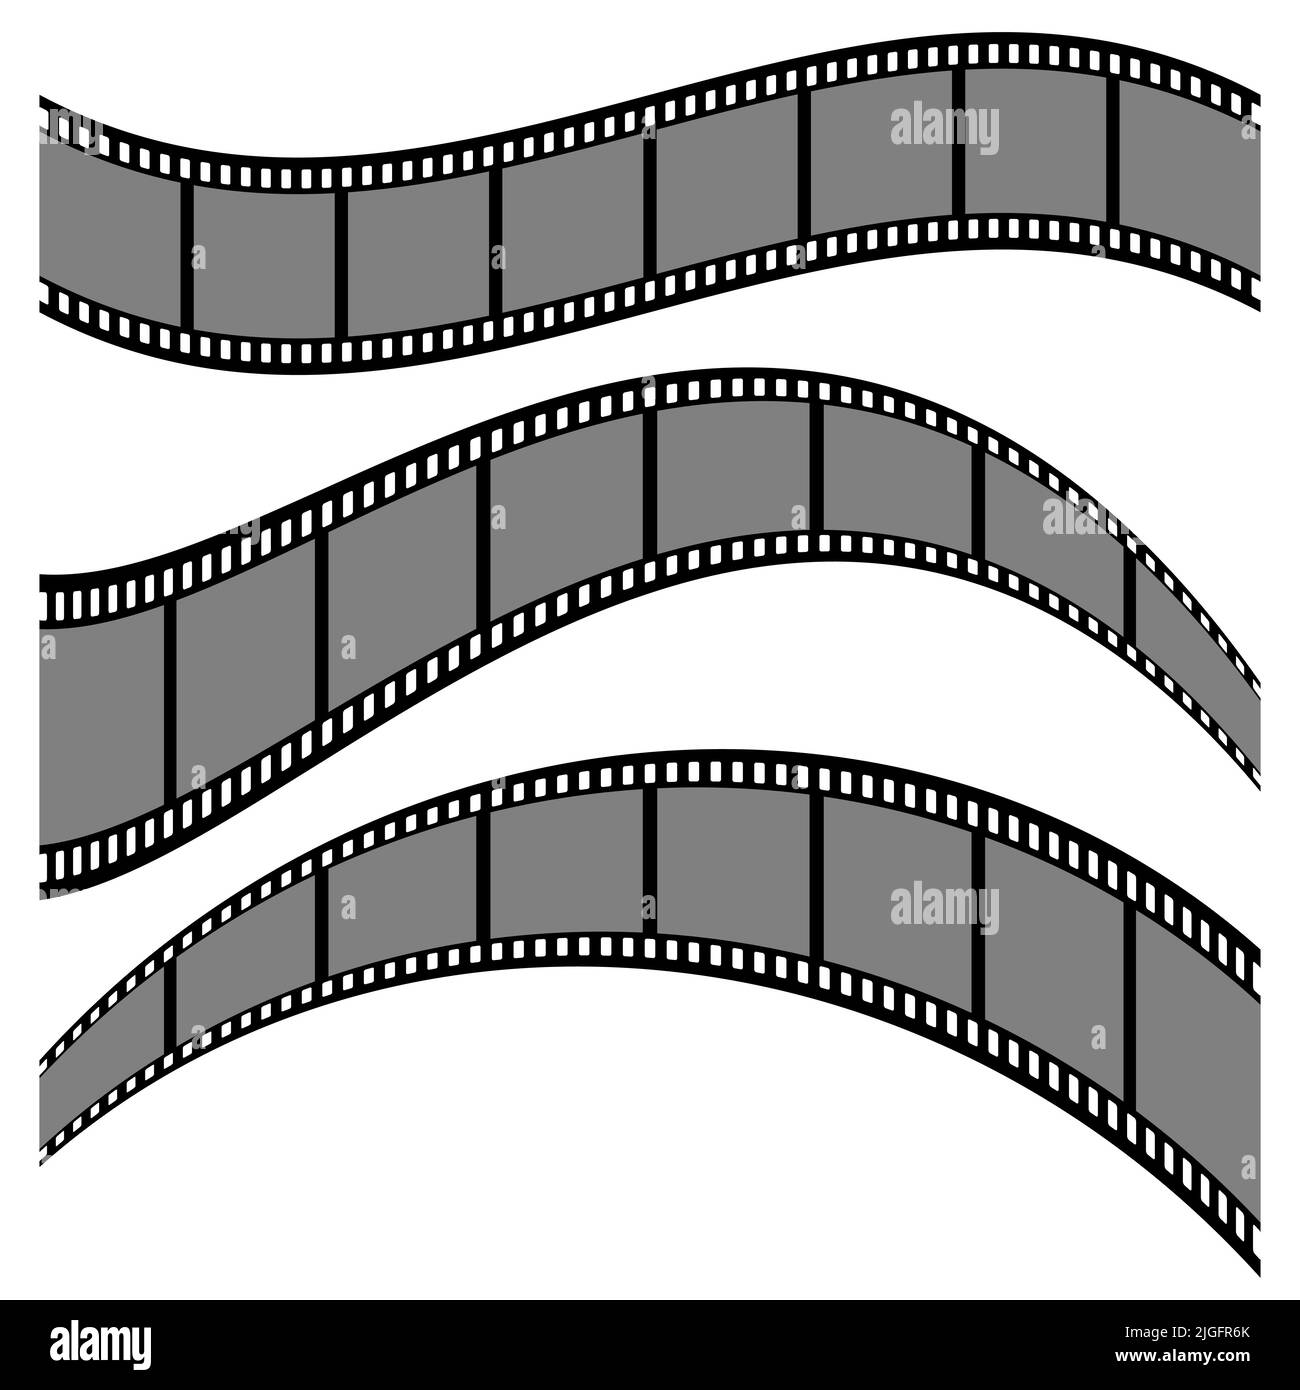 Film strip collection vector illustration isolated on white background Stock Vector